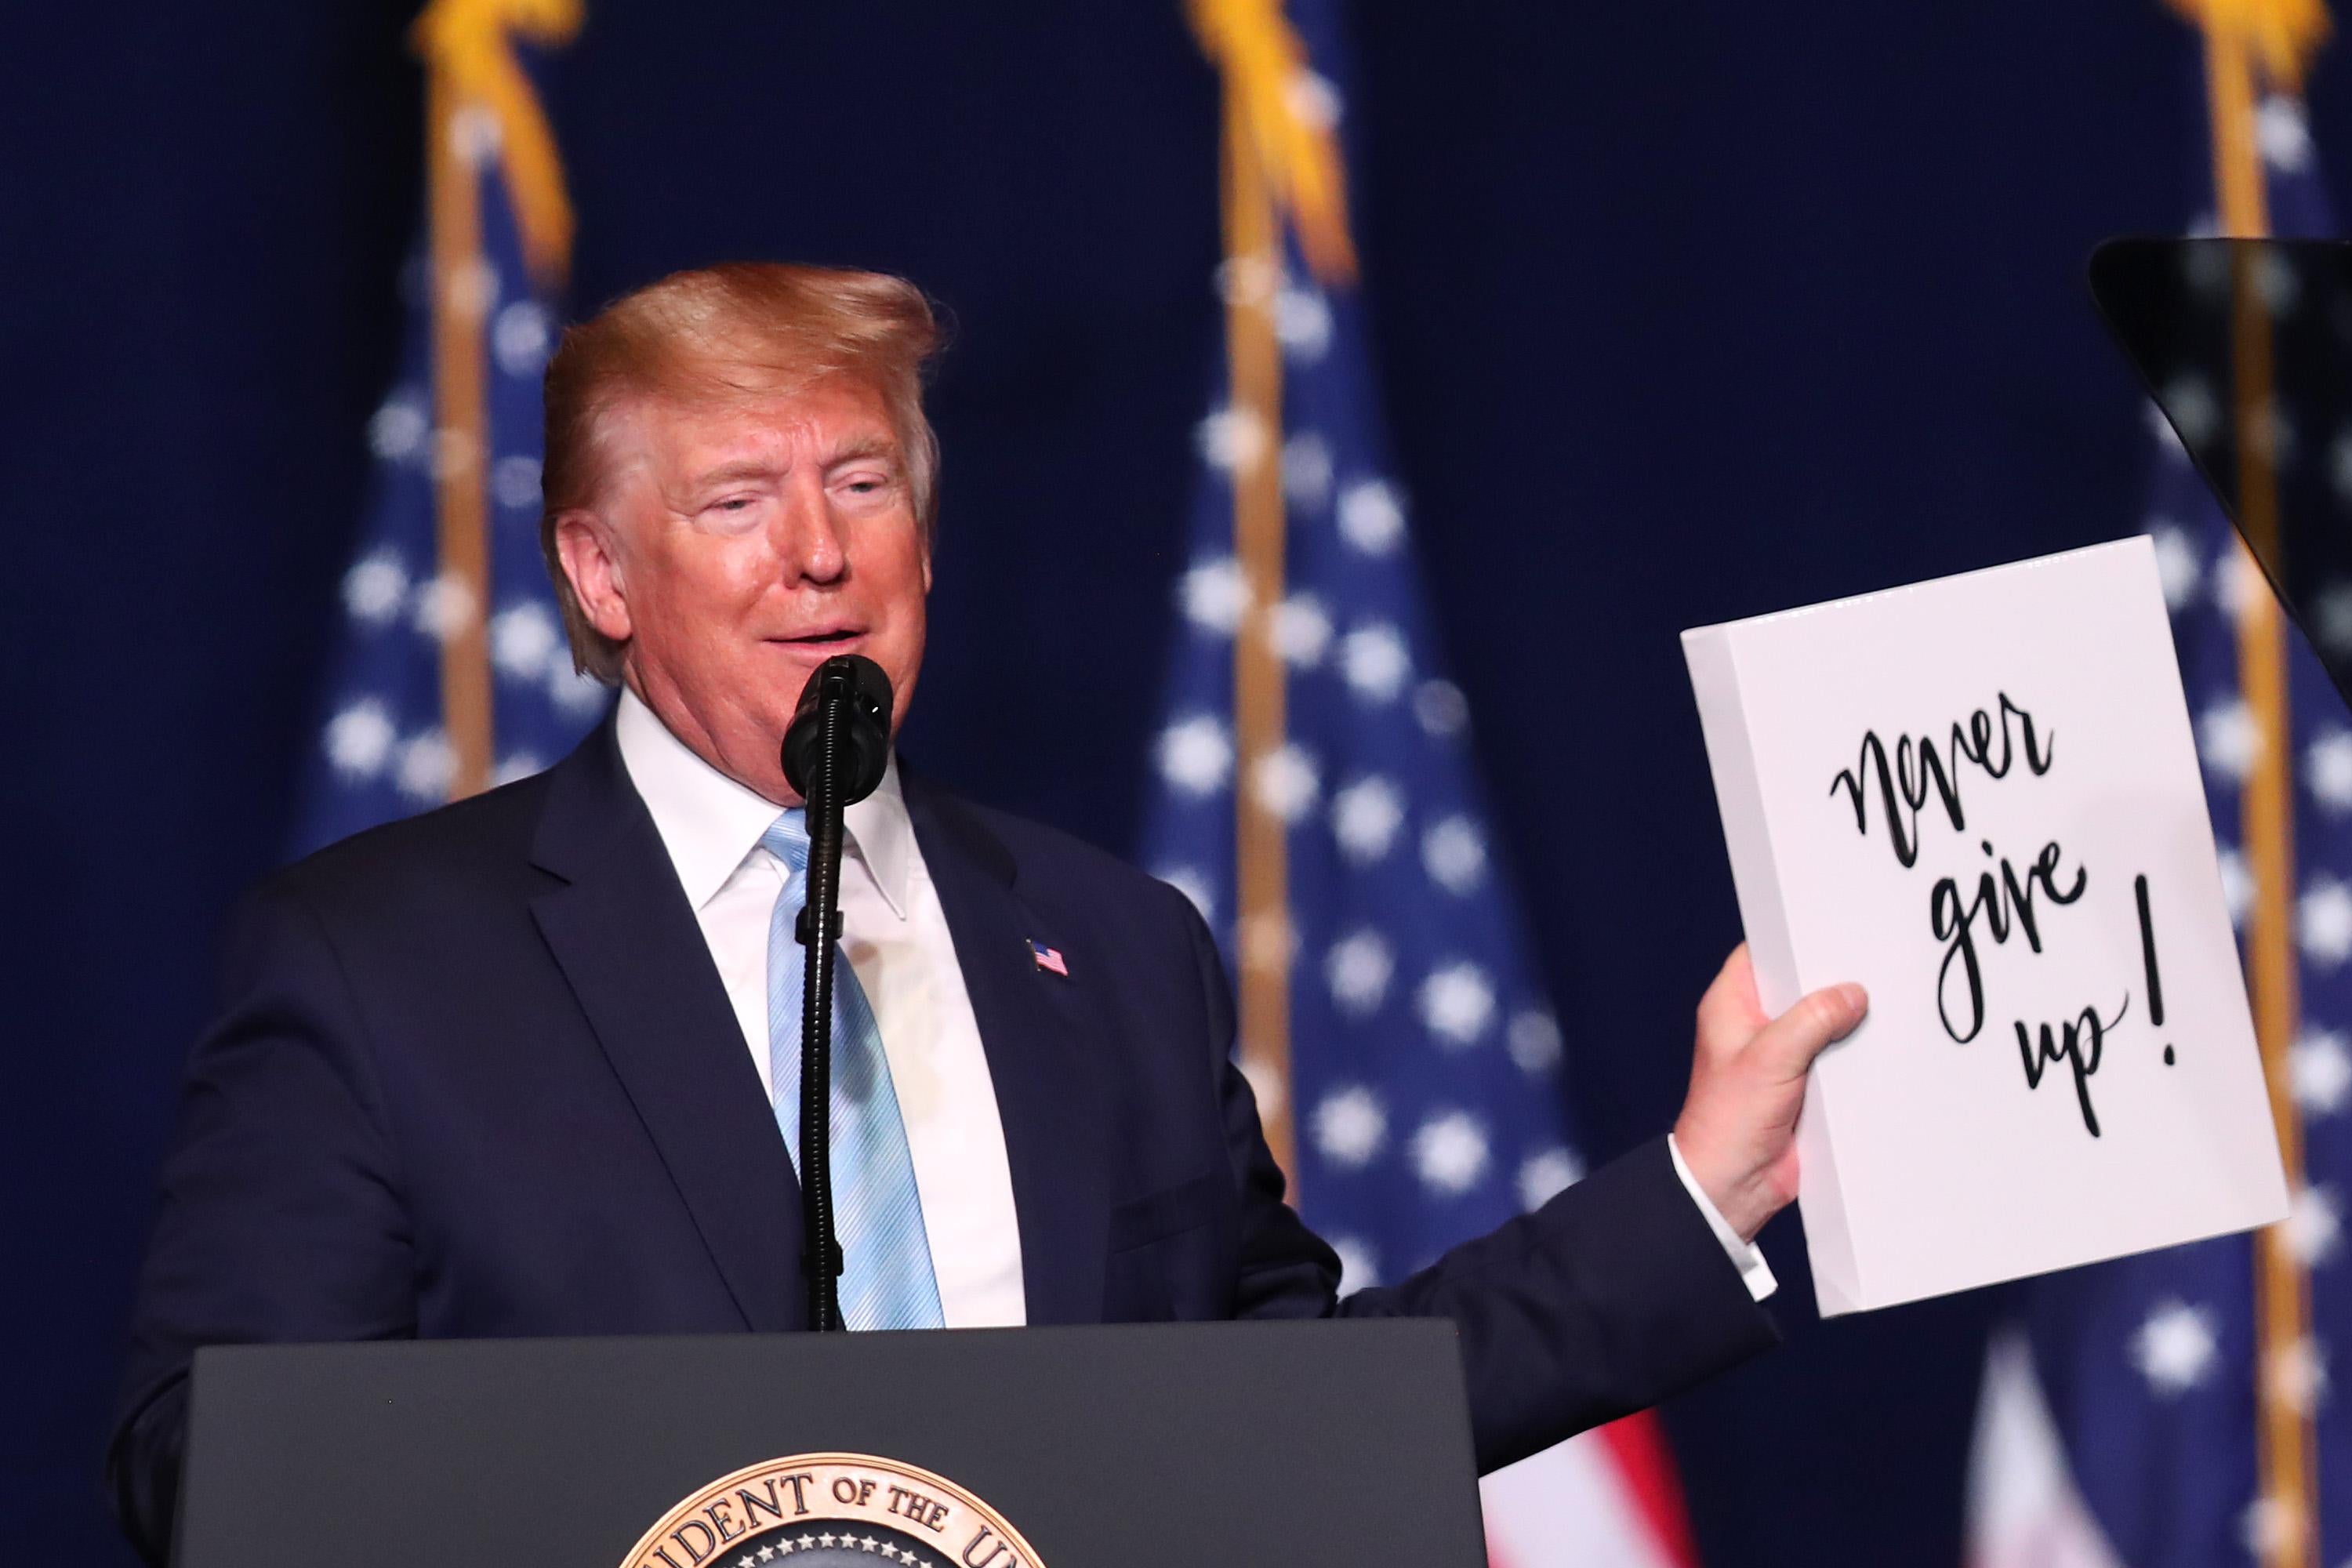 Donald Trump stands at a podium and holds up a sign that reads "Never Give Up!" in a loopy typeface